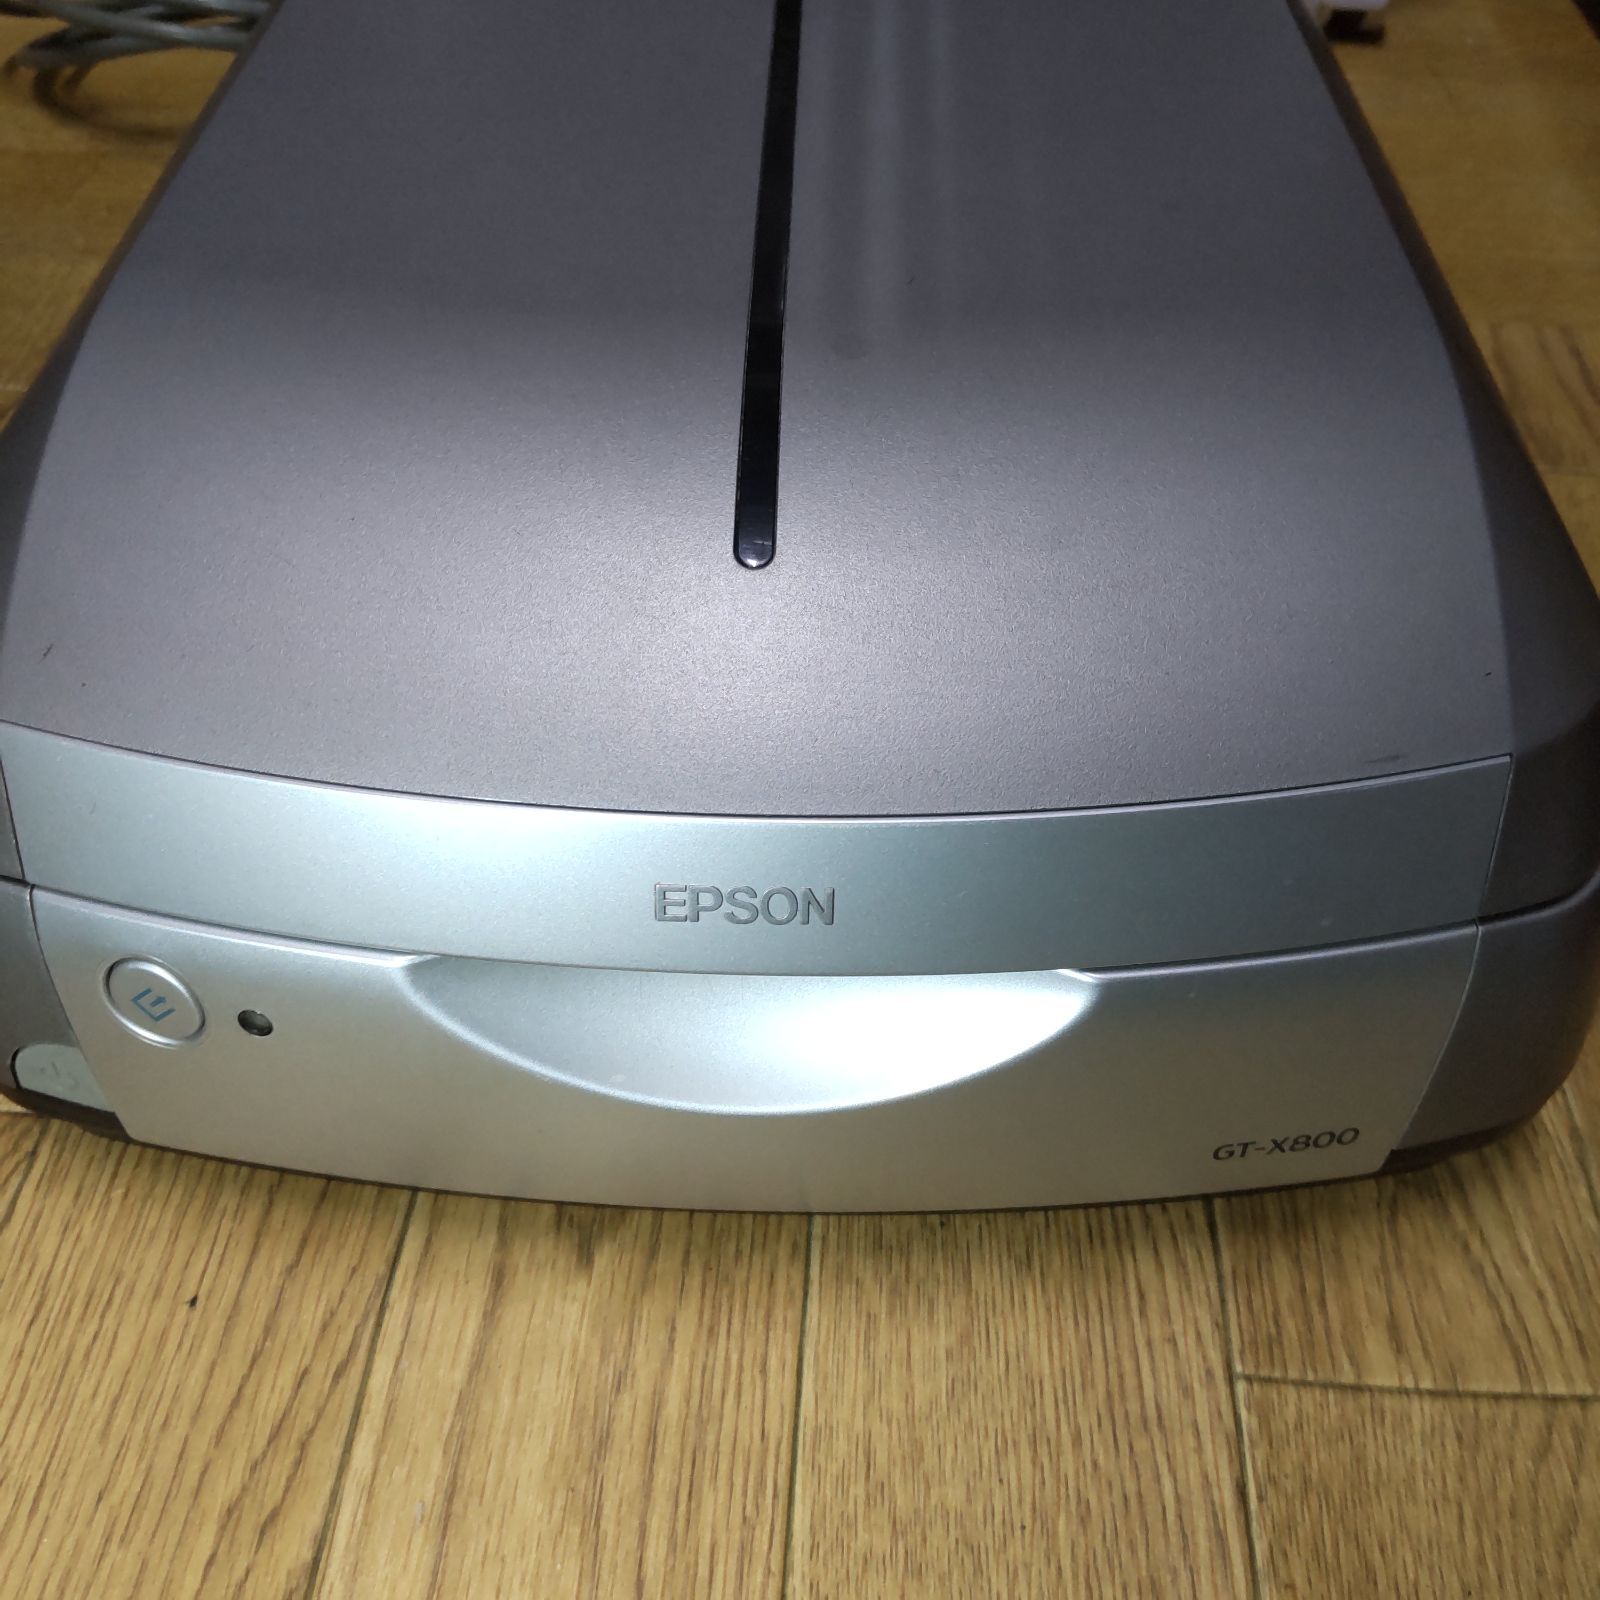 EPSON GT-X800 フィルムホルダー付属